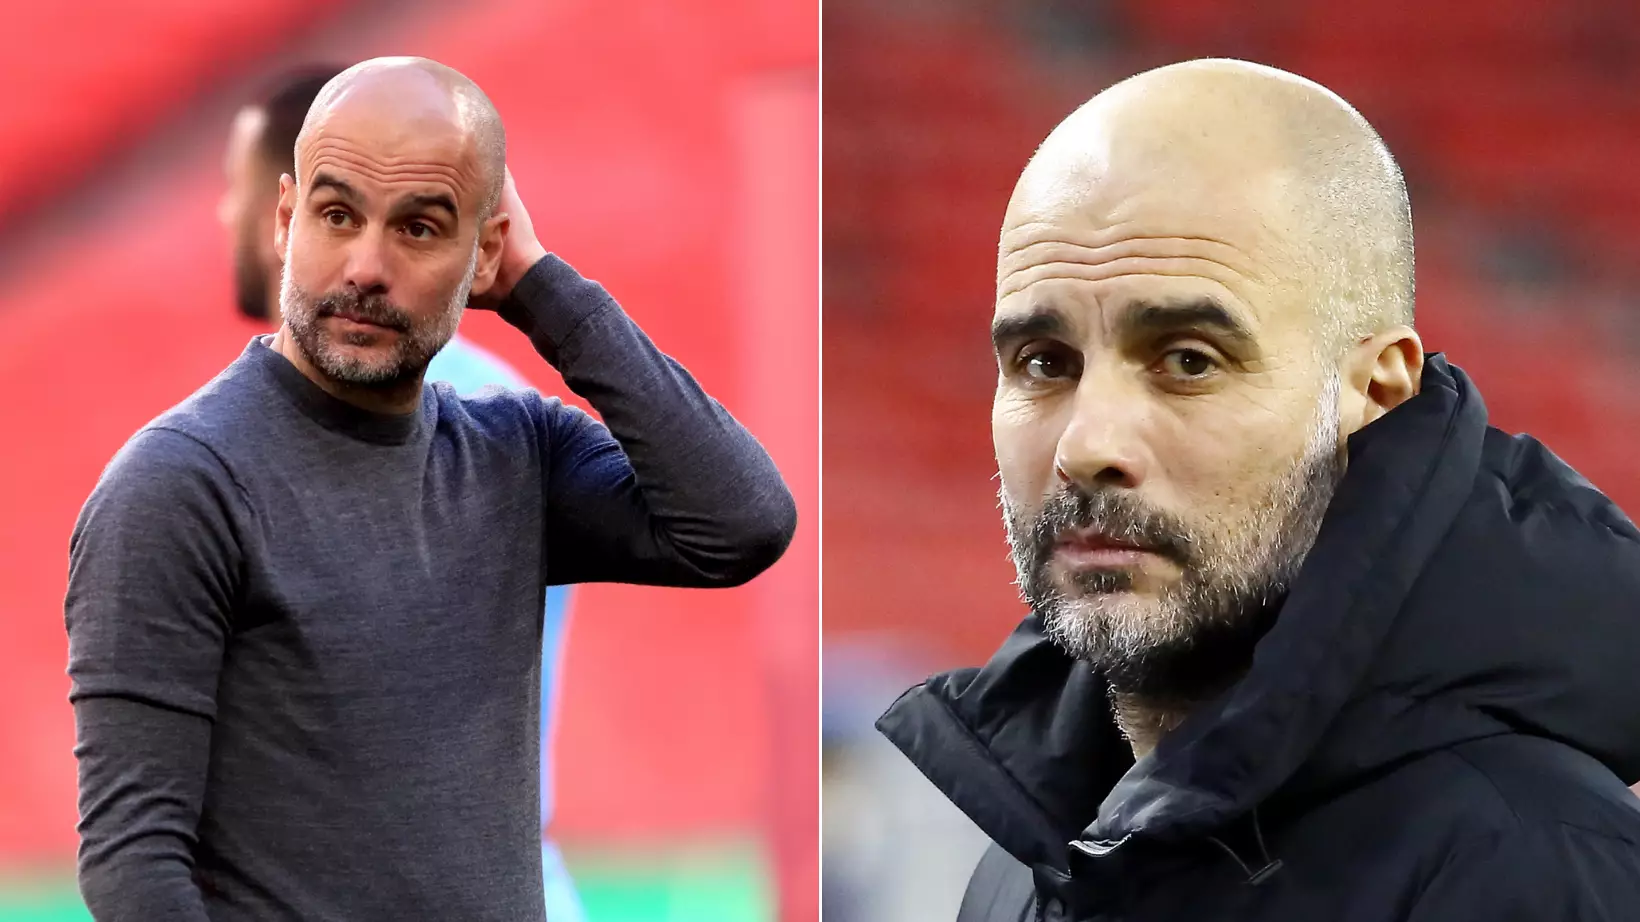 The Job Pep Guardiola Wants When He's 72 - Already Has His Assistant In Mind